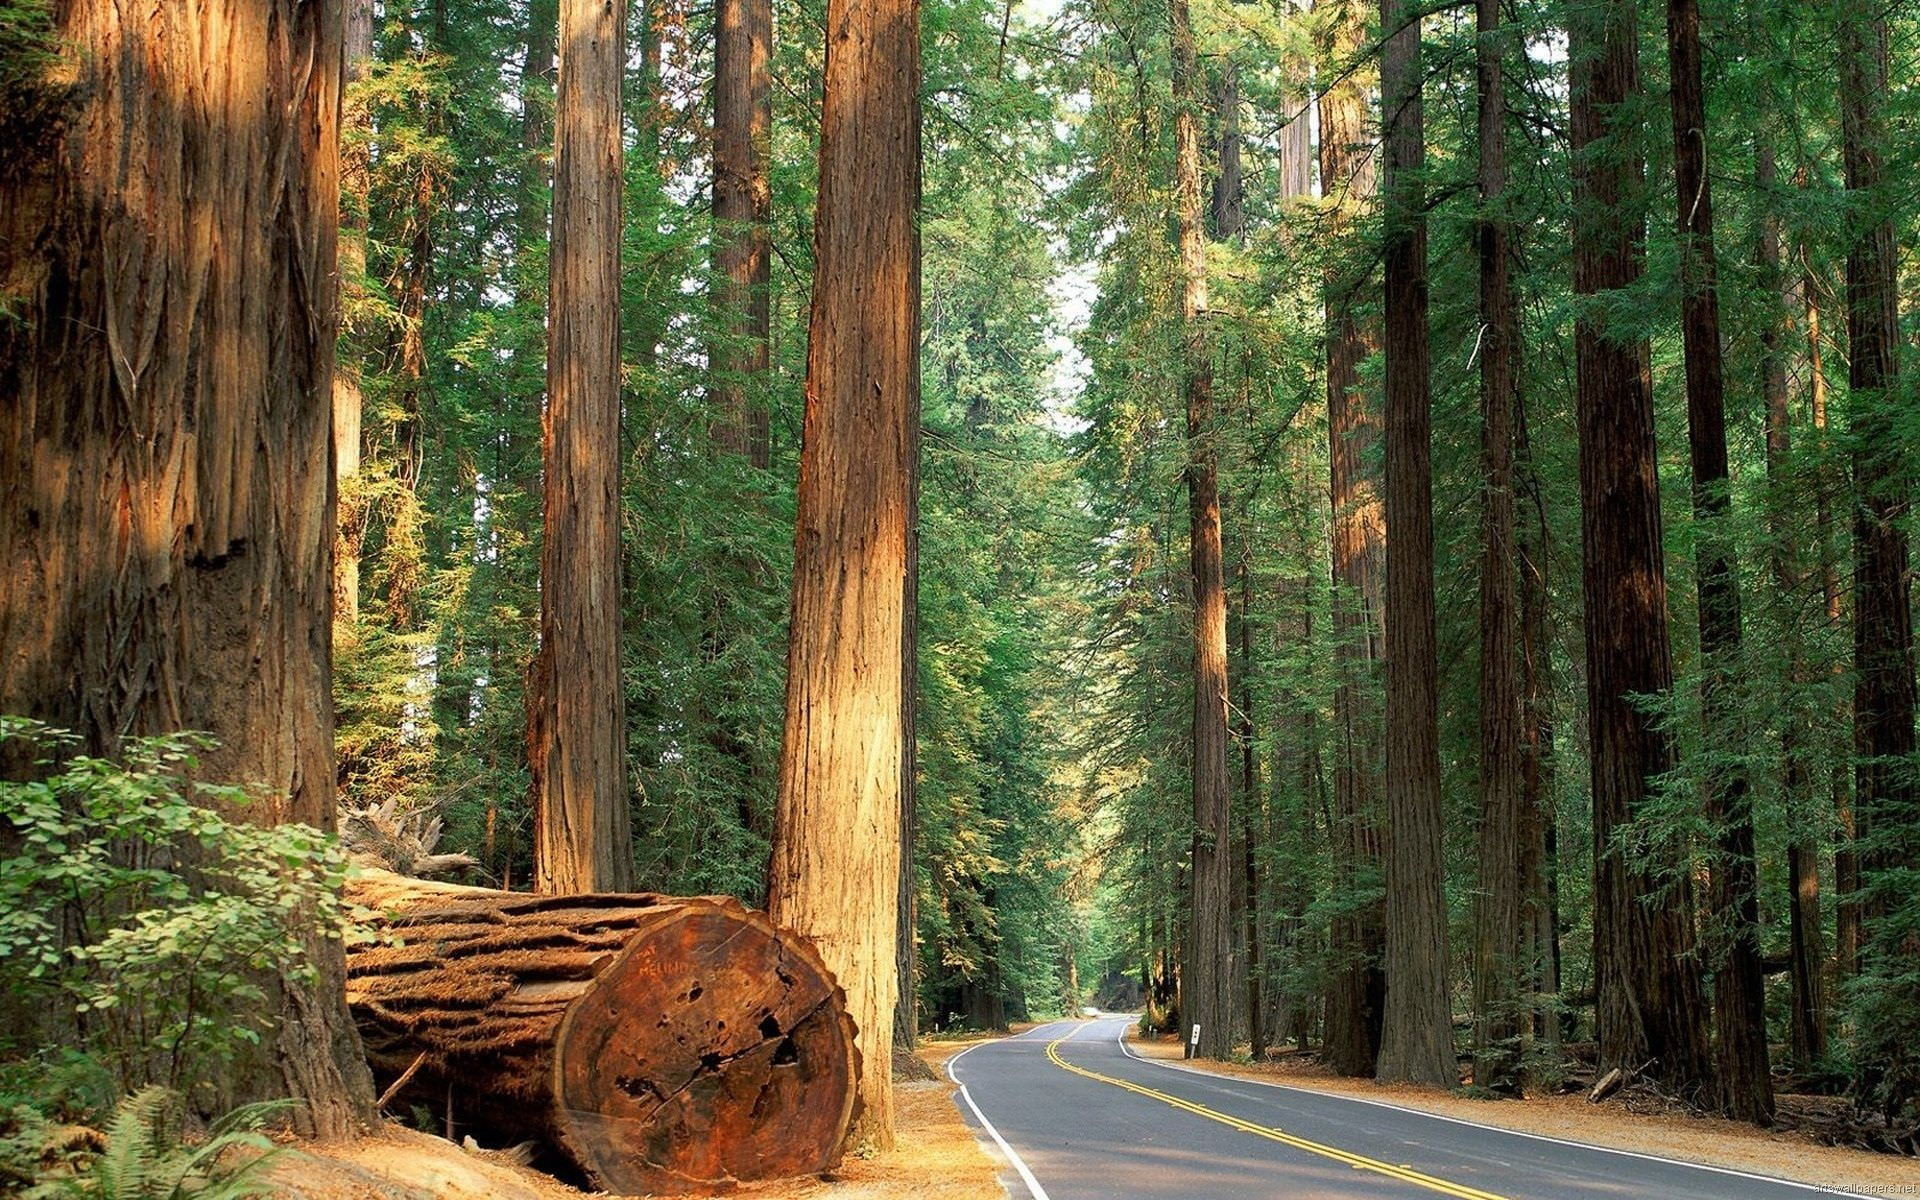 1920x1200 Sequoia National Park Wallpapers In HD Quality HD Wallpapers Inx 